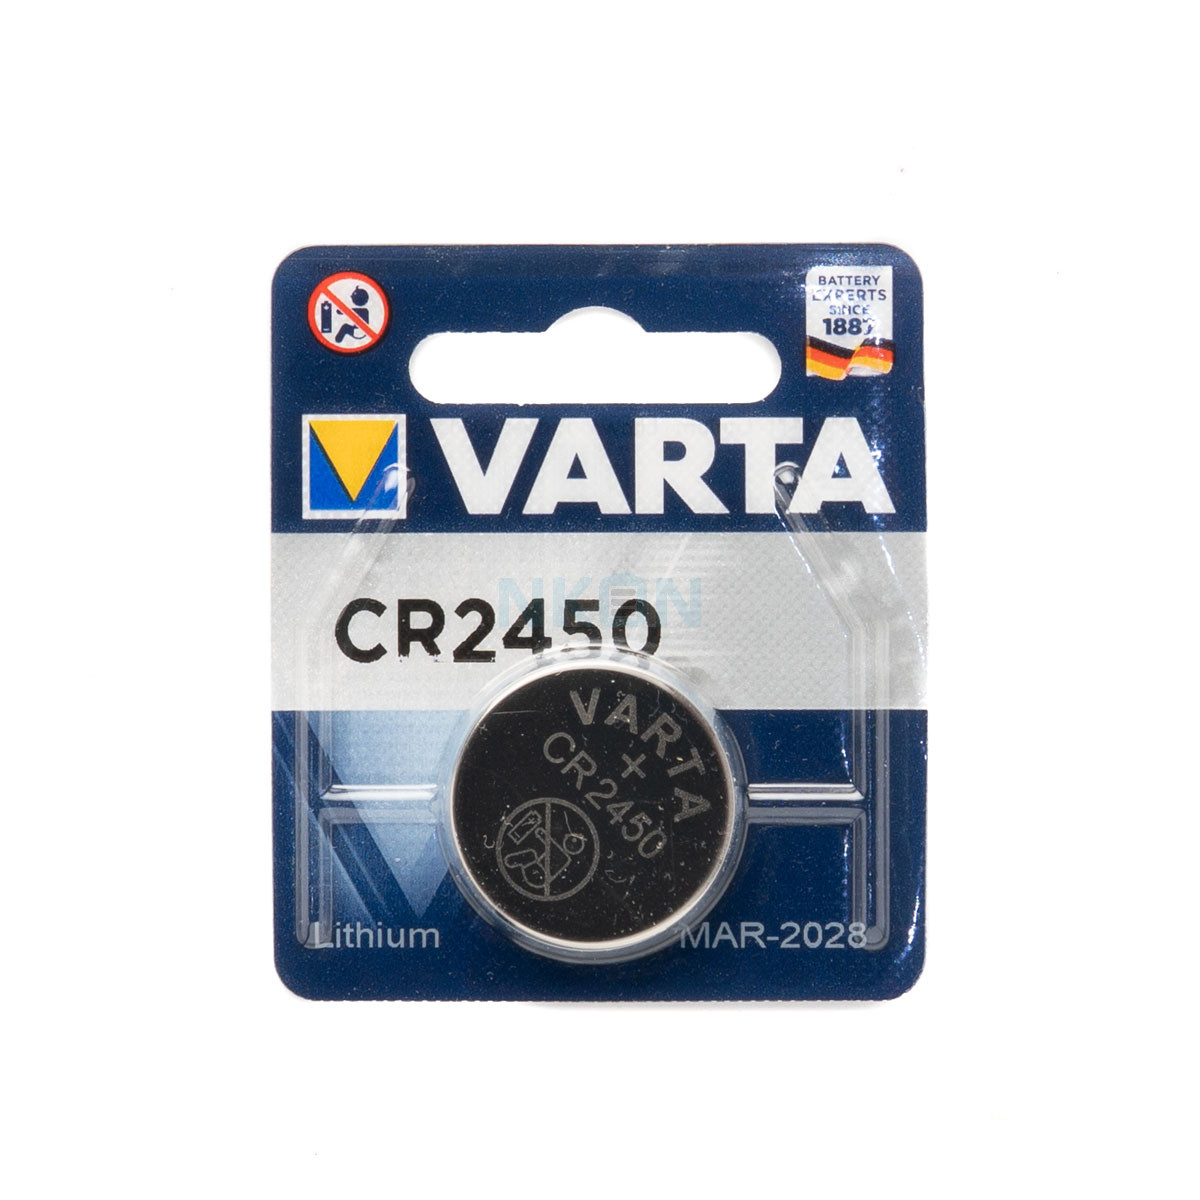 Varta CR2450 - 3V - Button cell & other sizes - Lithium - Disposable  batteries